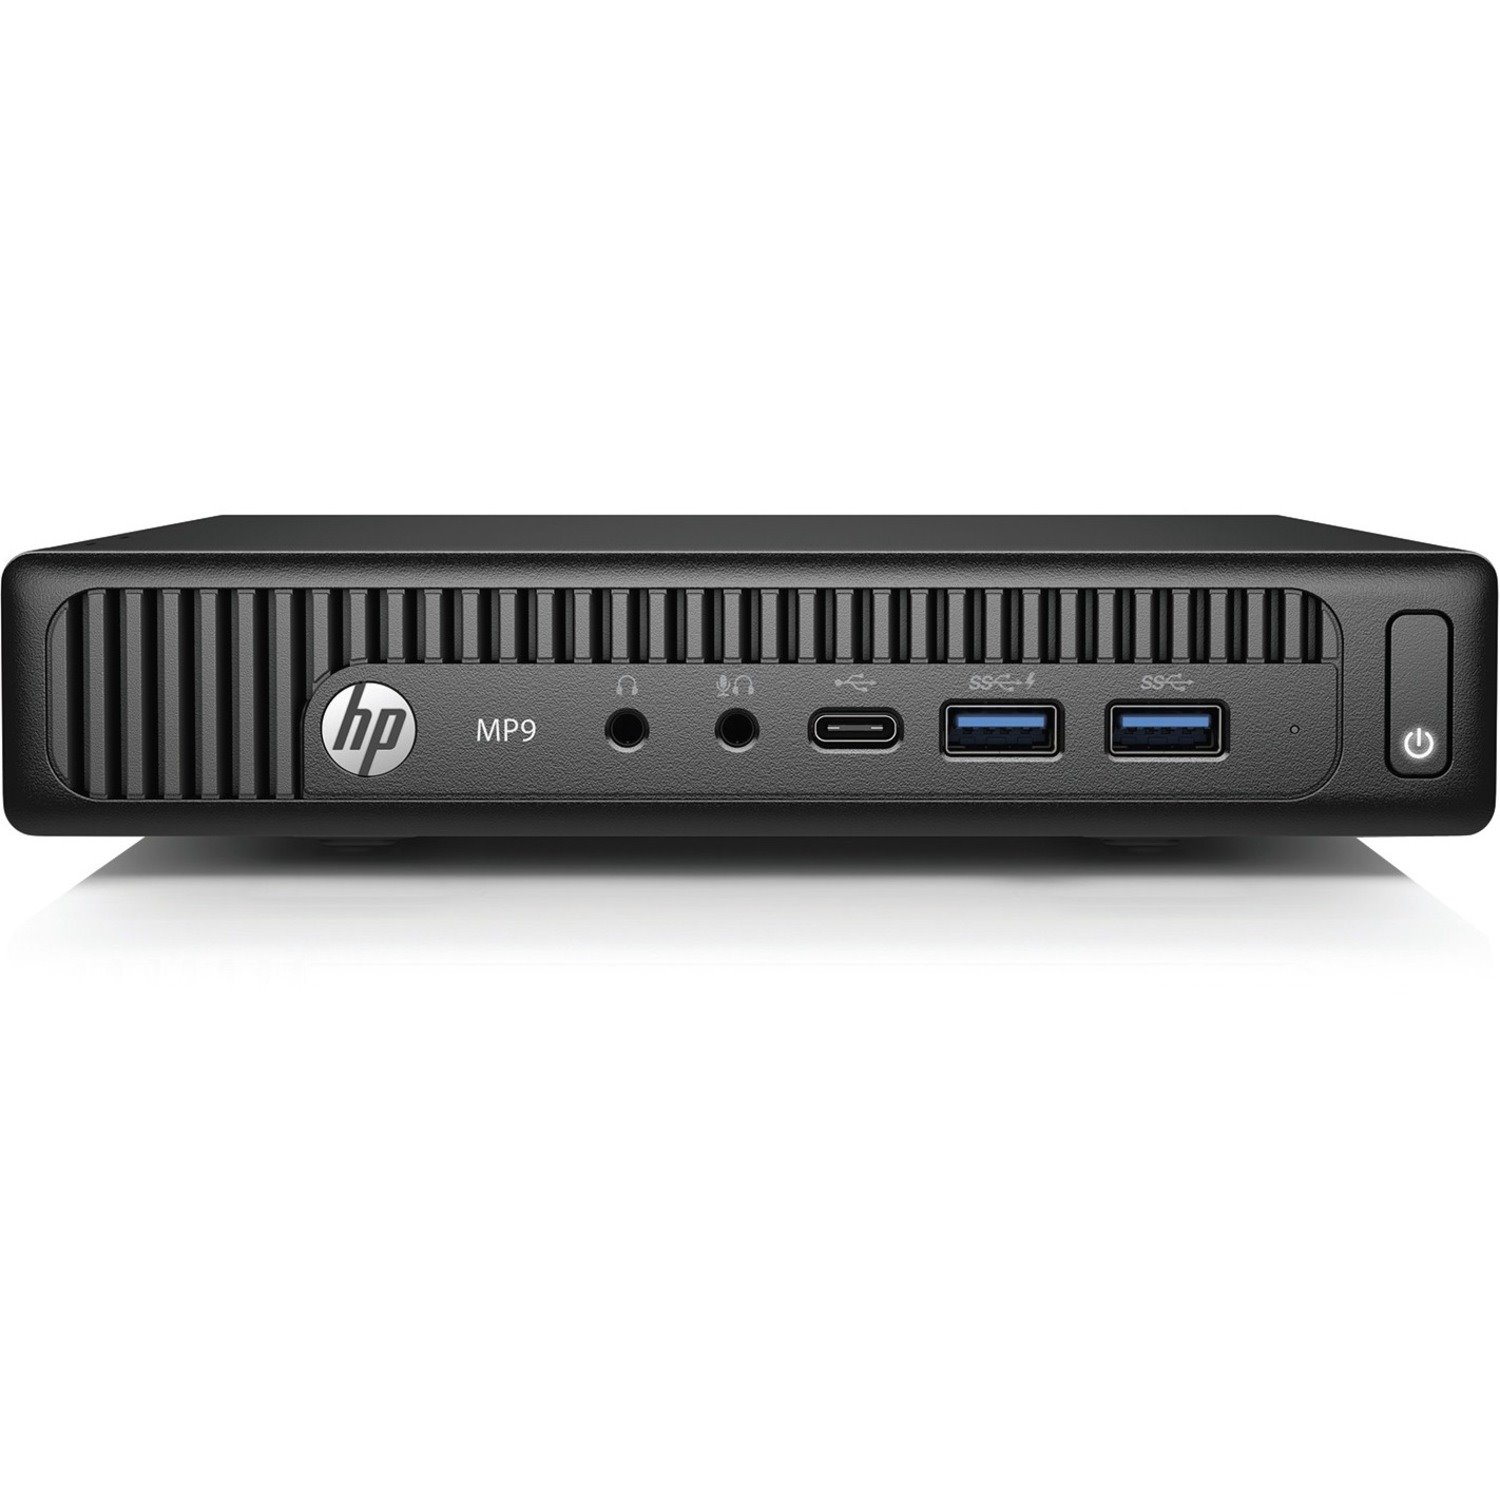 HP MP9 G2 Retail System